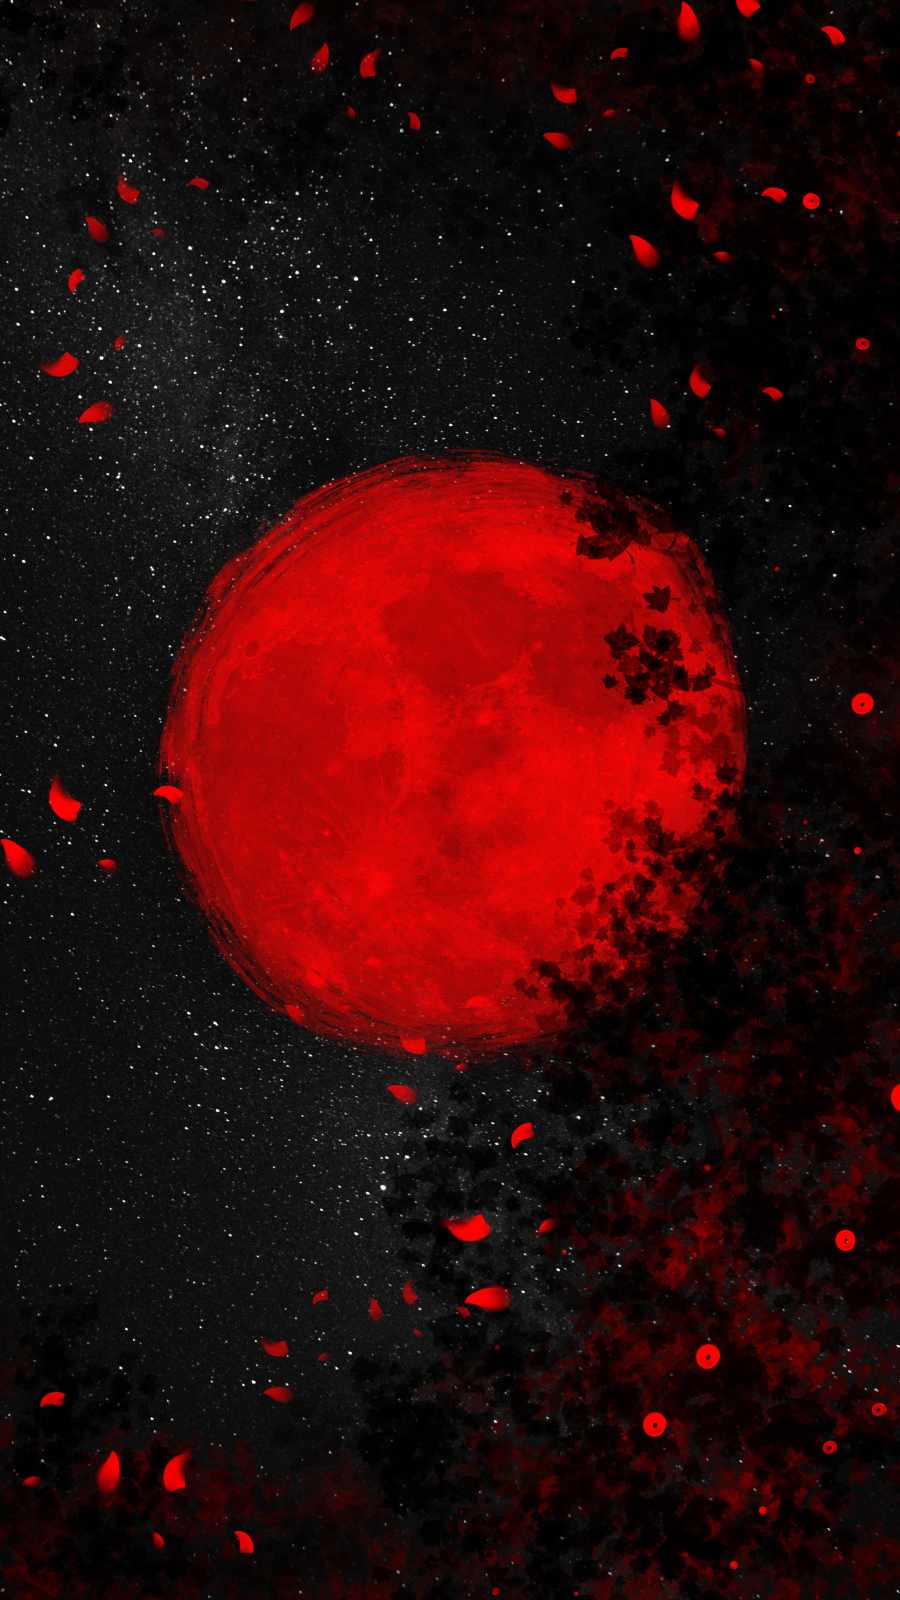 Red moon in the night sky - Moon